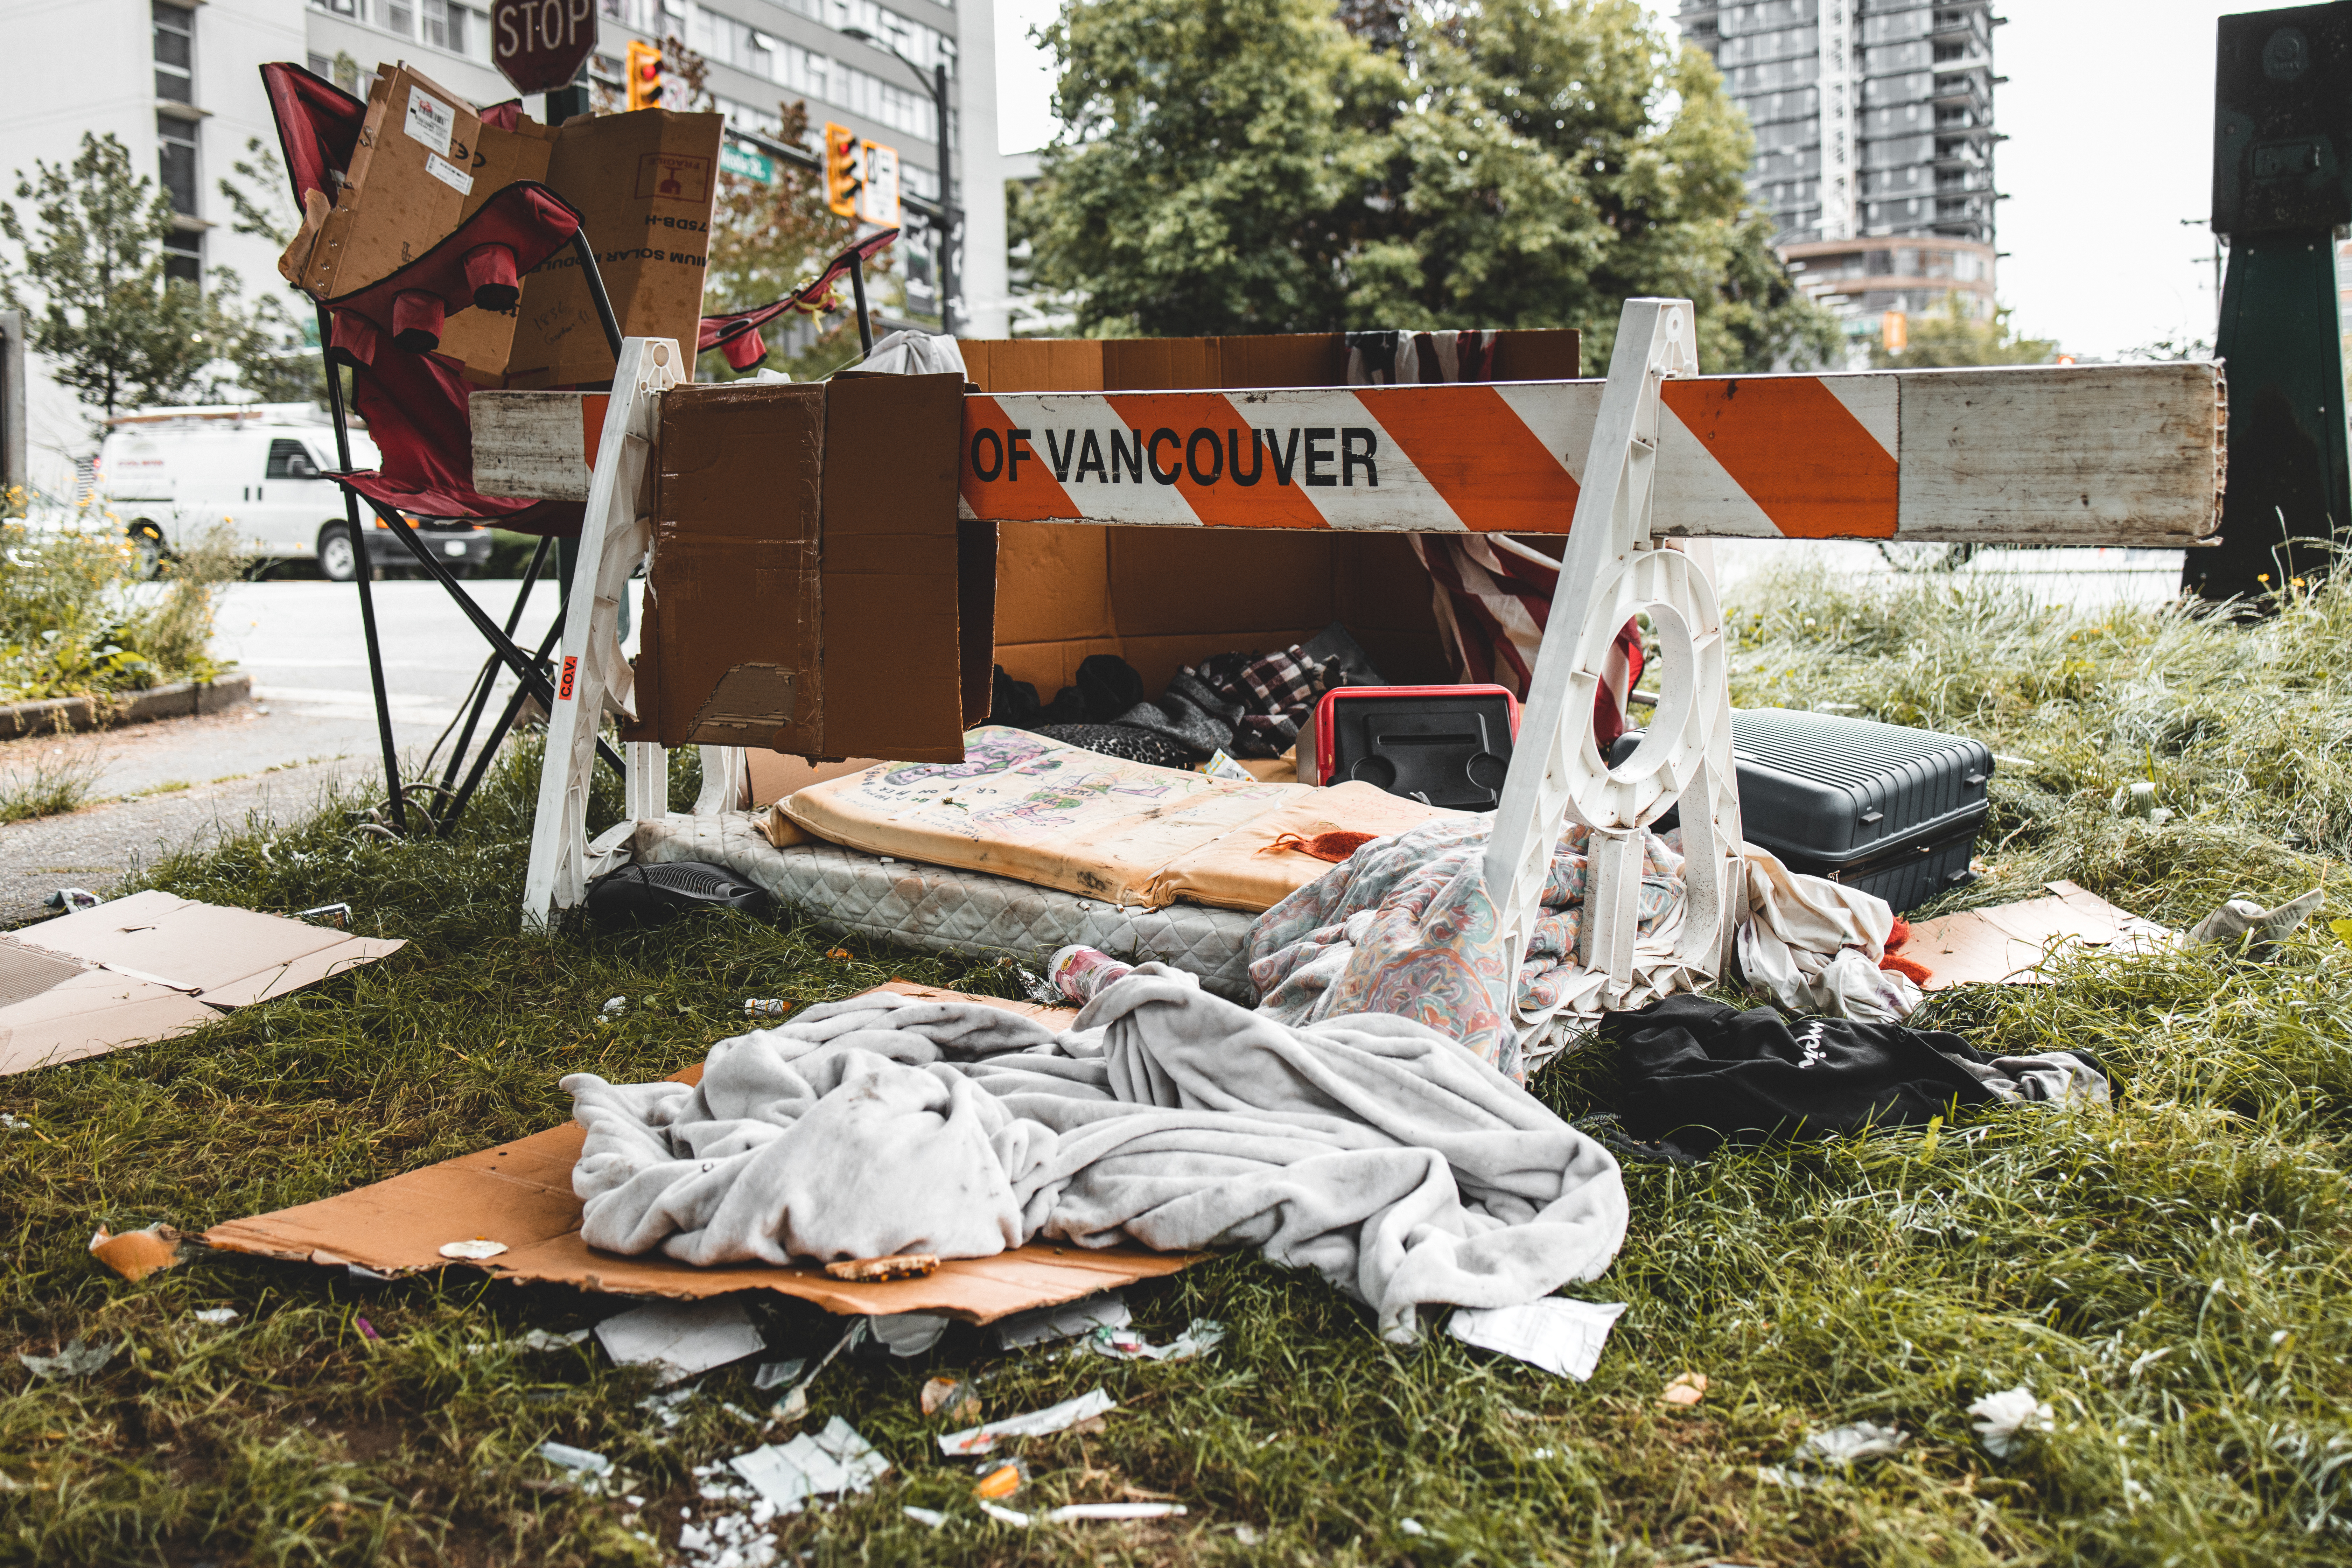 Photo showing City of Vancouver traffic barricade surrounded by blanket, mattress, chair and other belongings and waste